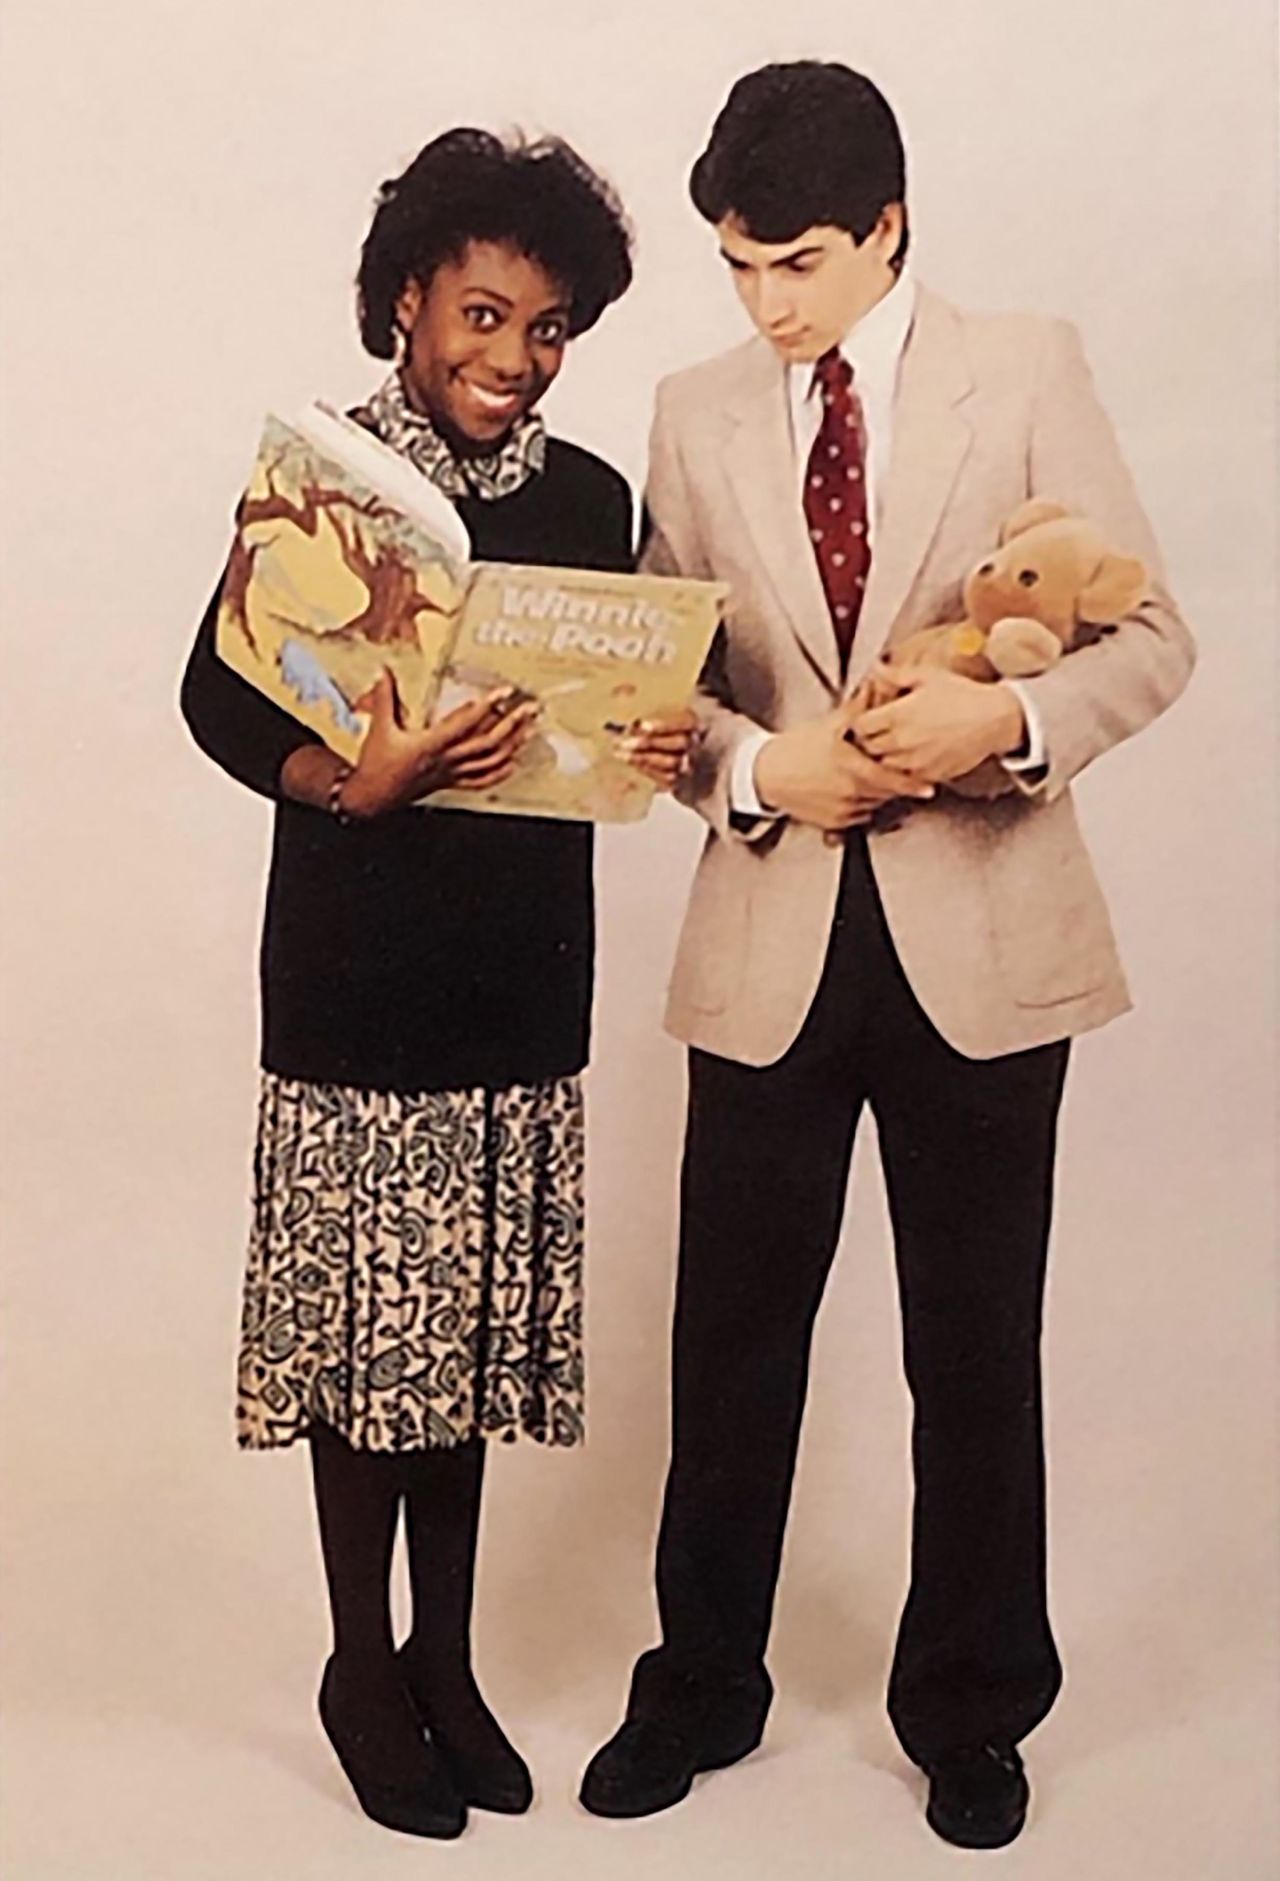 Jackson and Stephen Rosenthal, high school seniors, are pictured as "Hall of Fame" members in their 1988 yearbook. "I want to go into law and eventually have a judicial appointment," Jackson said in the yearbook.